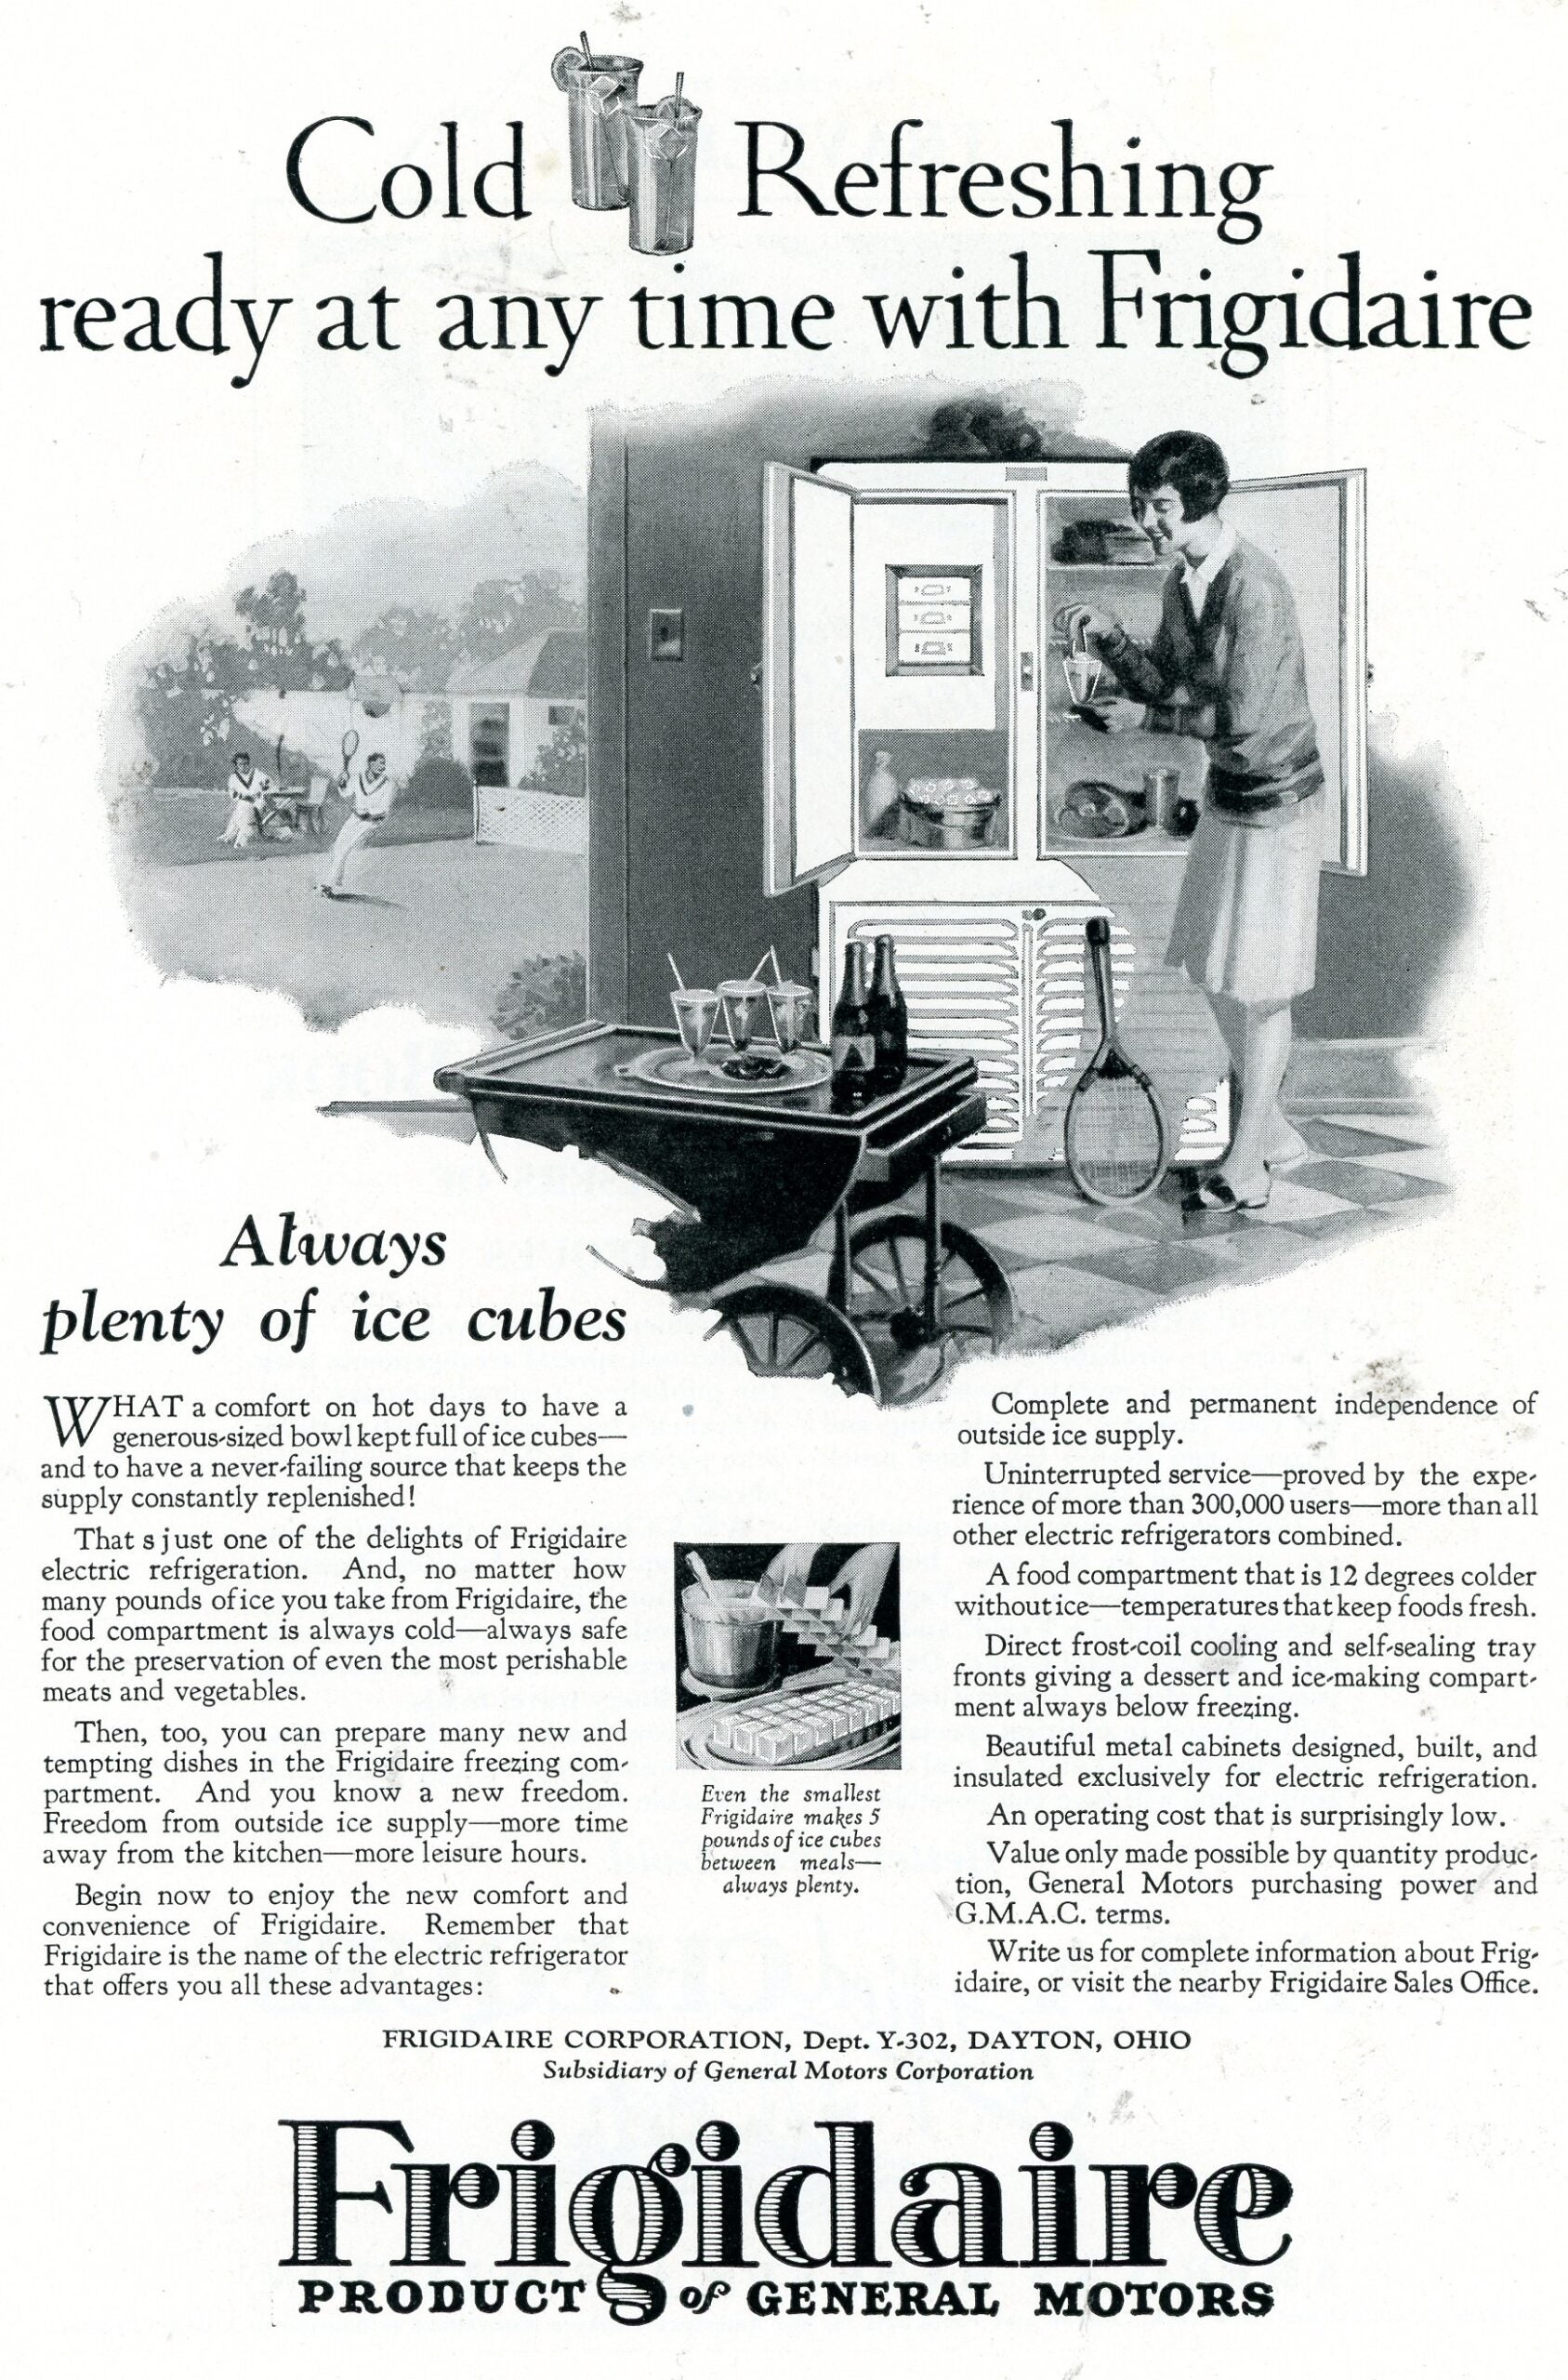 https://www.thedrive.com/uploads/2022/10/05/1927-Frigidaire-Ad-CREDIT-Don-O_Brien-via-Flickr-scaled.jpg